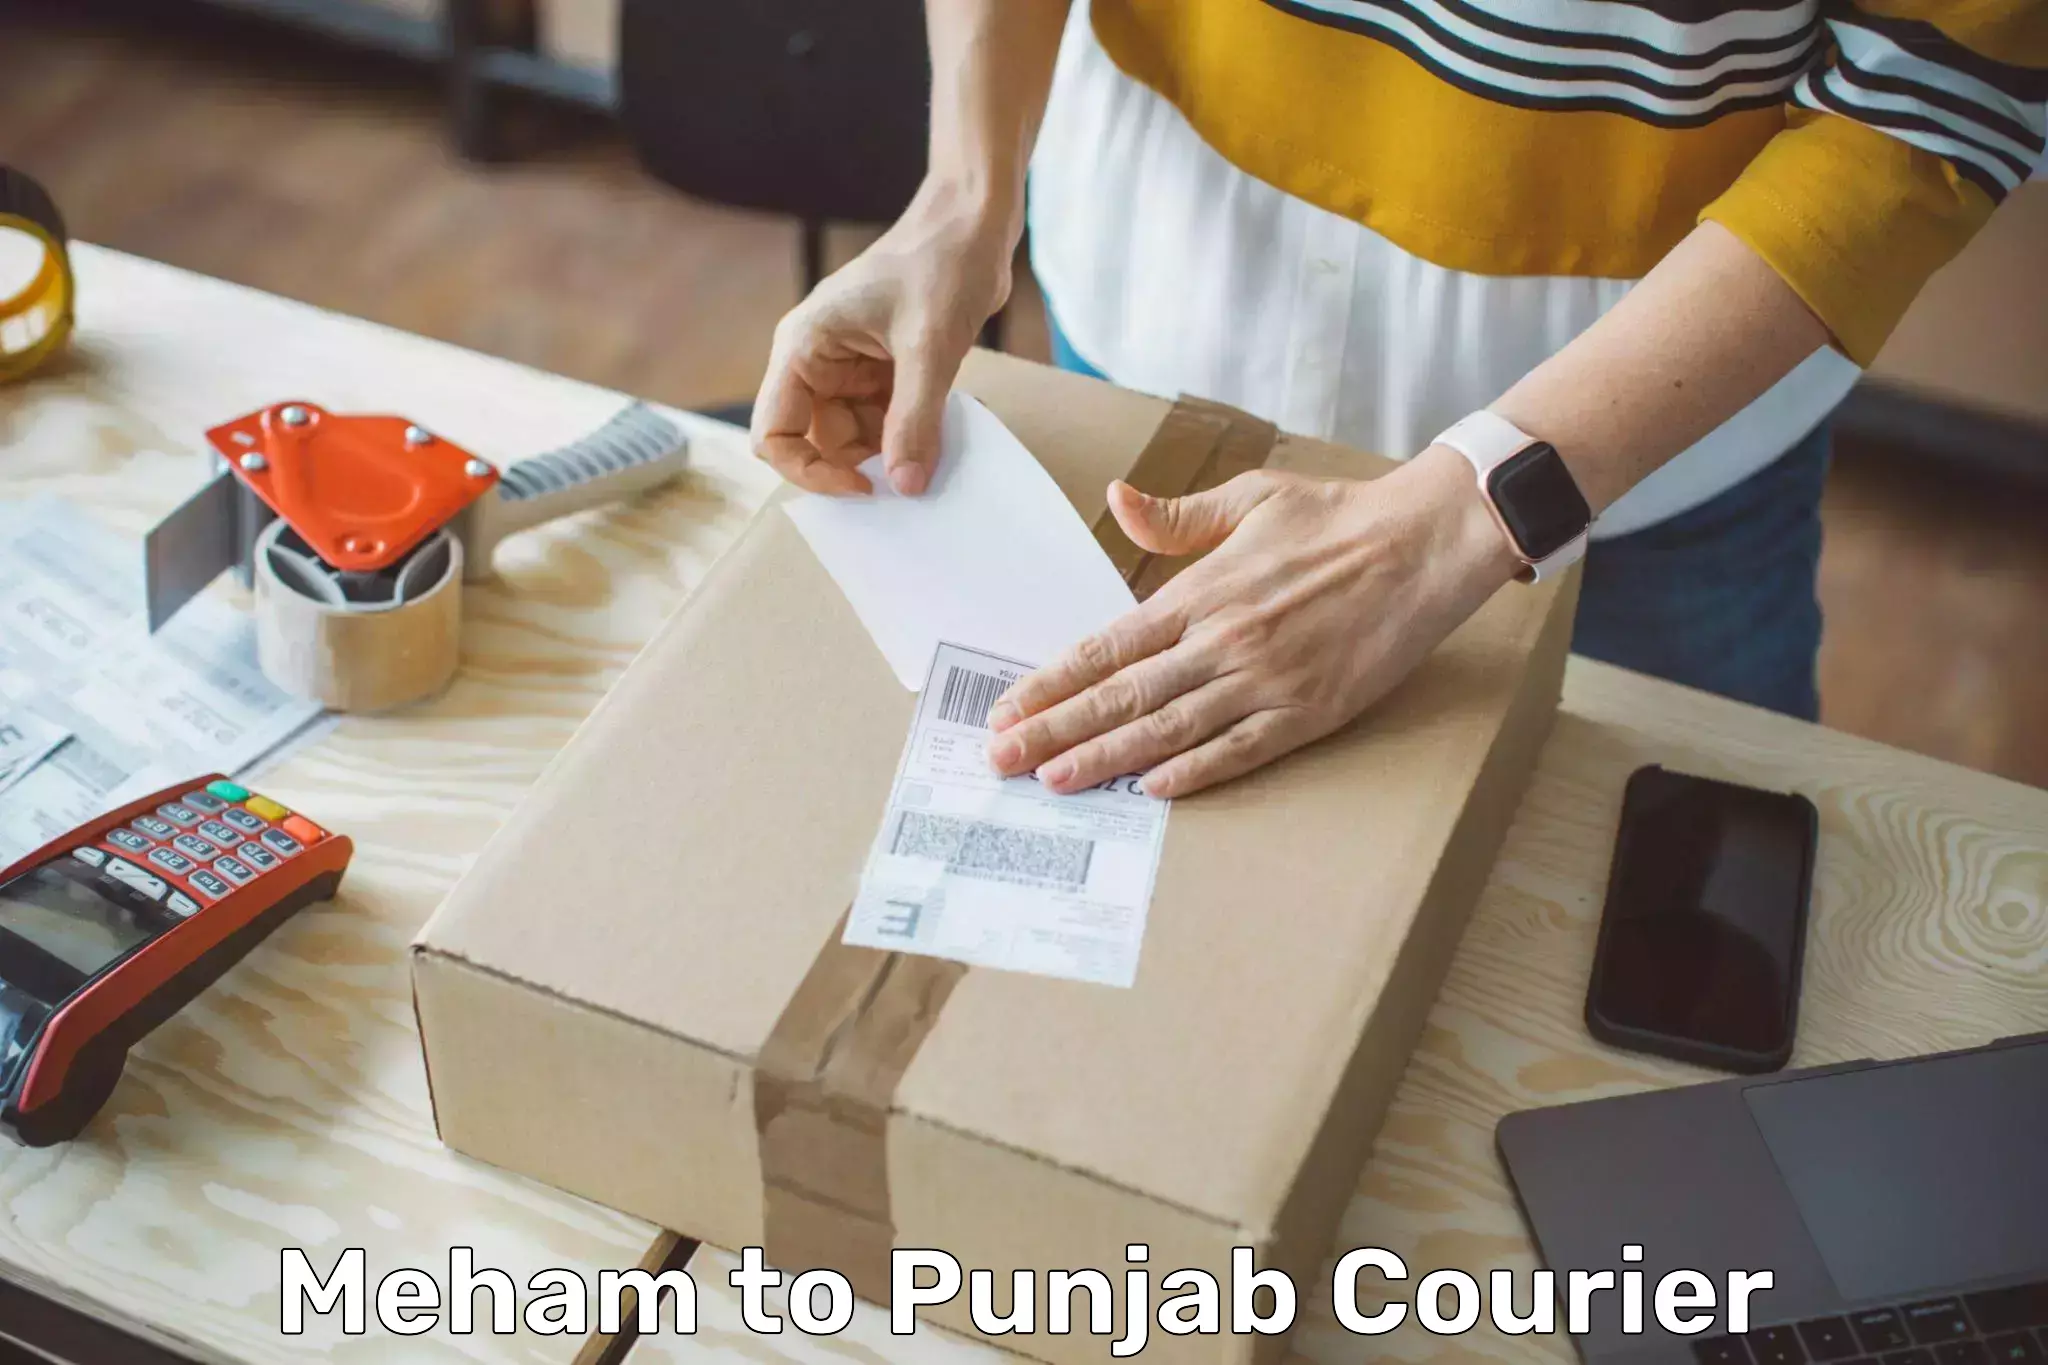 Customized delivery options Meham to Punjab